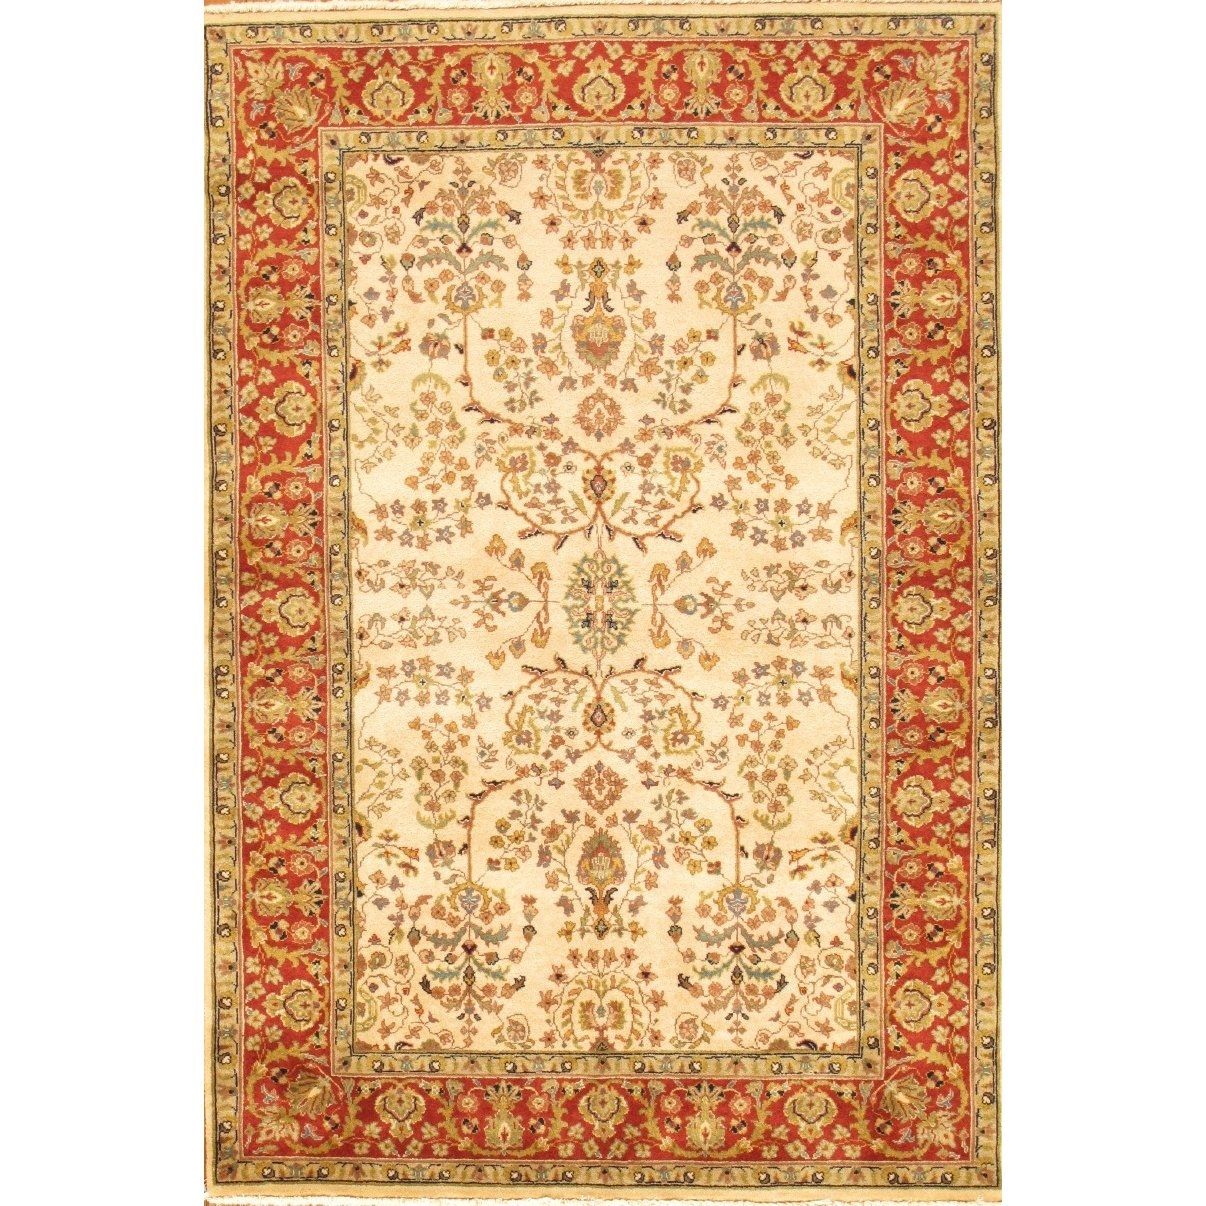 Wool Area Rugs Dunes Collection Candler Wool Area Rug Kinder For Traditional Wool Area Rugs (View 15 of 15)